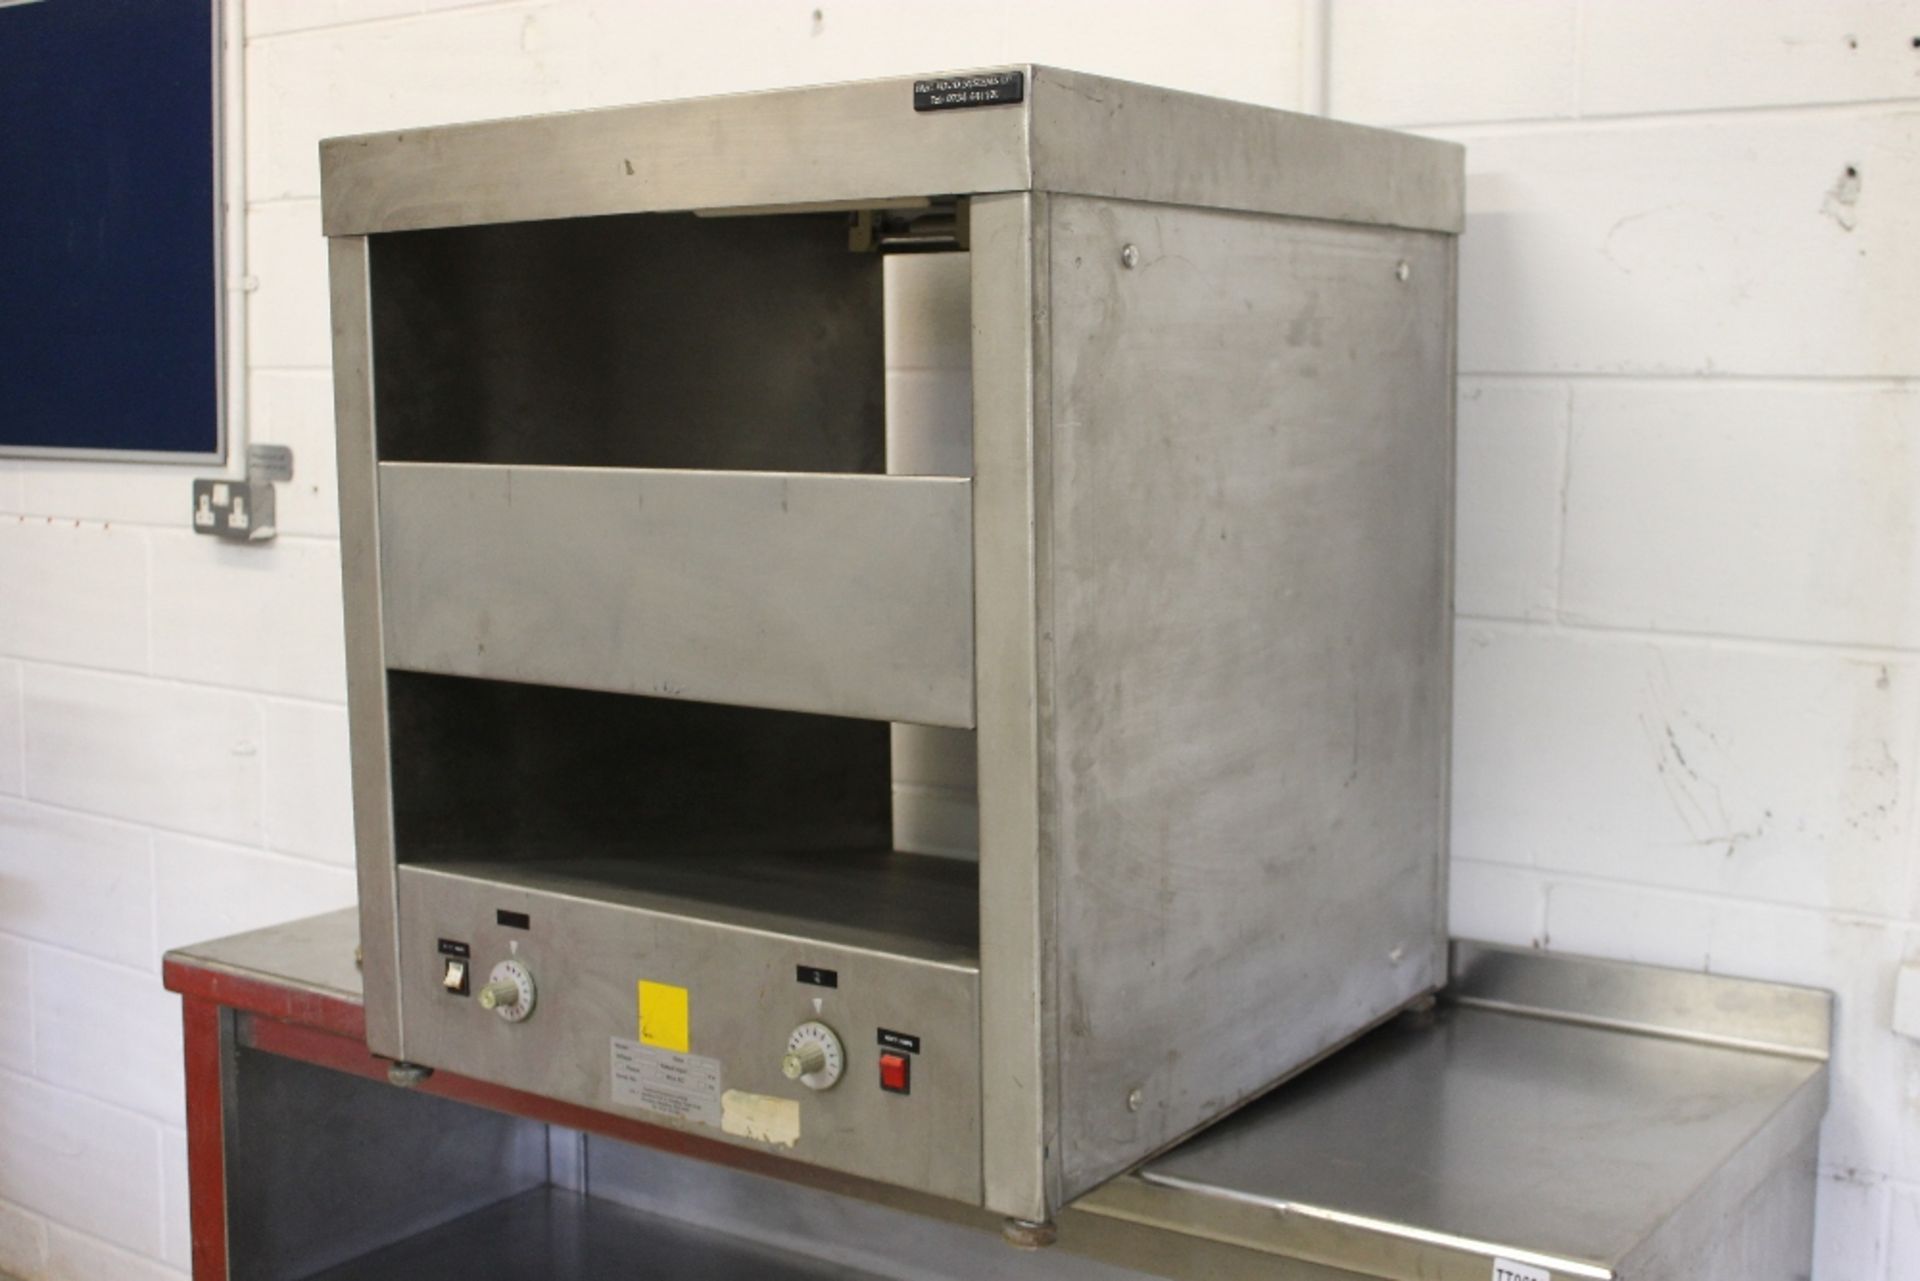 Stainless Steel heated Burger Chute – missing button cover